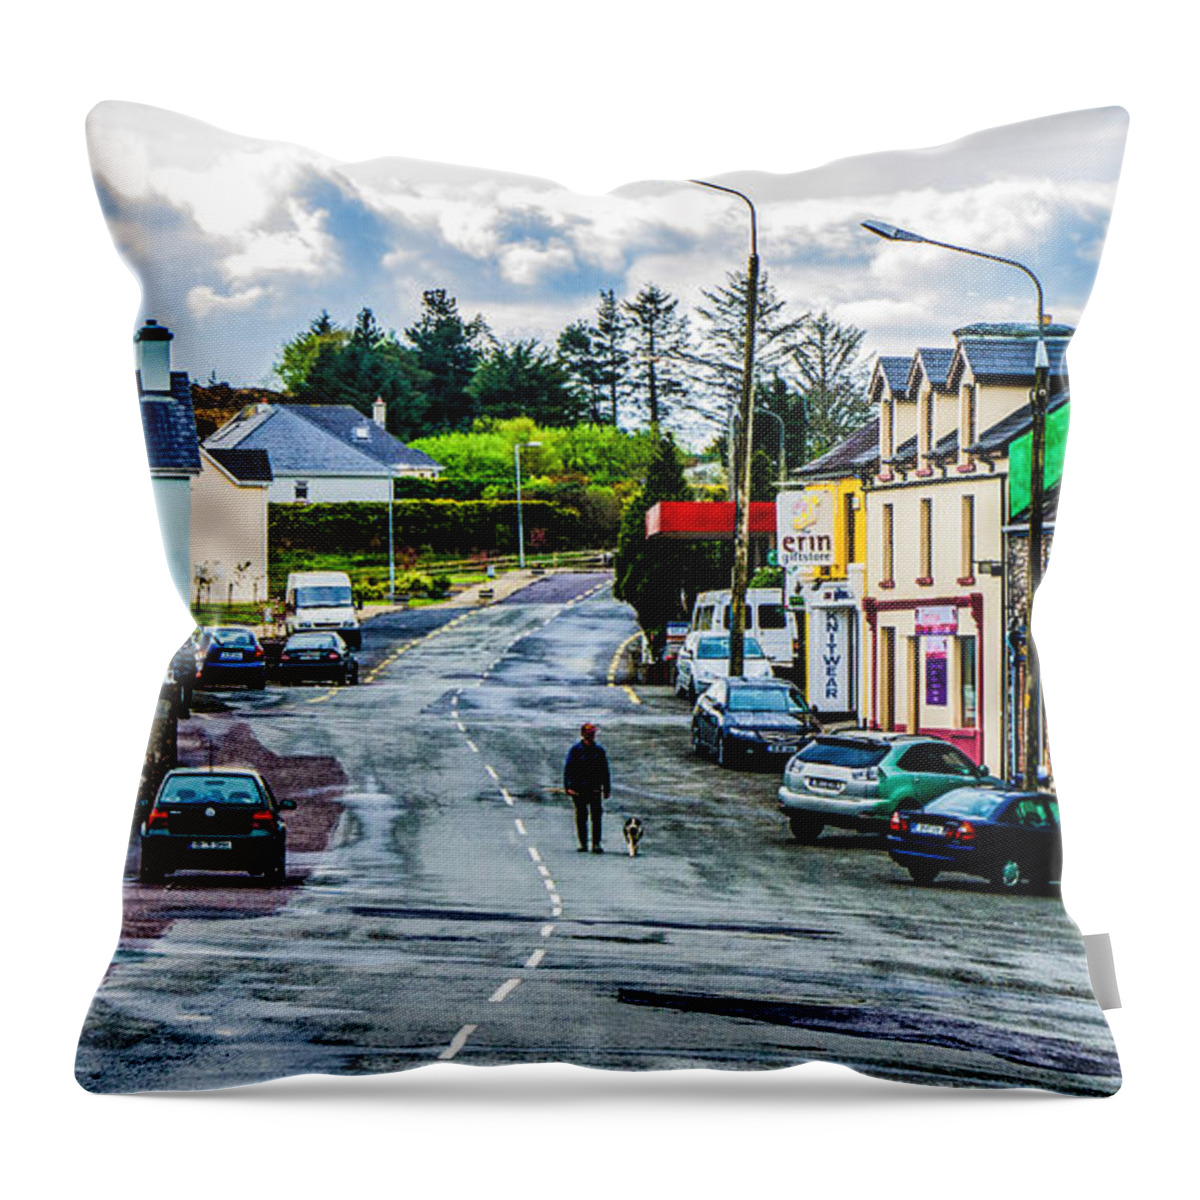 Architectural Throw Pillow featuring the photograph A Man And His Dog by Mary Carol Story